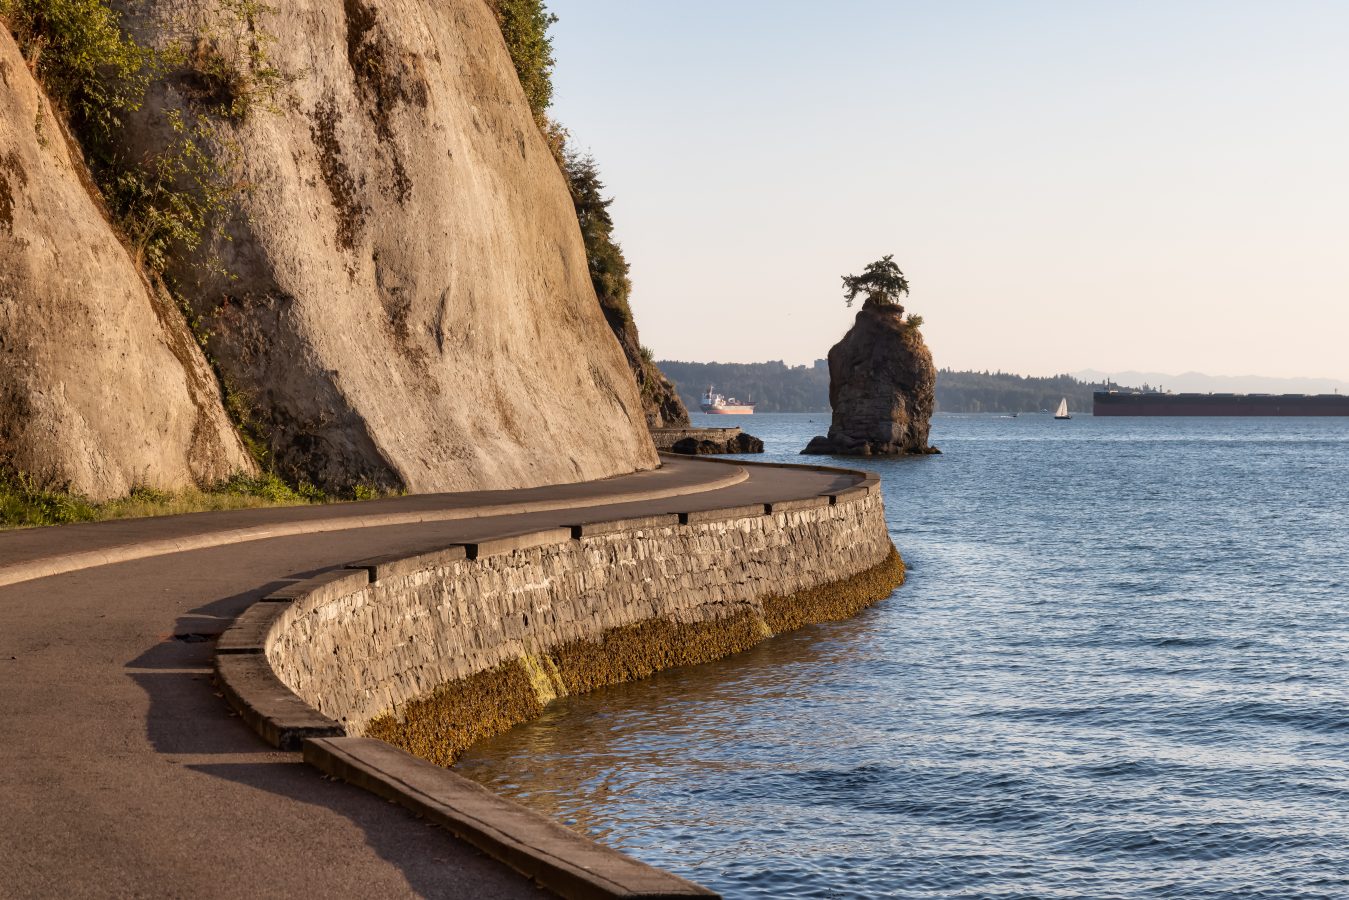 View of the Siwash Rock from Seawall at Stanley Park in Vancouver, British Columbia, Canada.